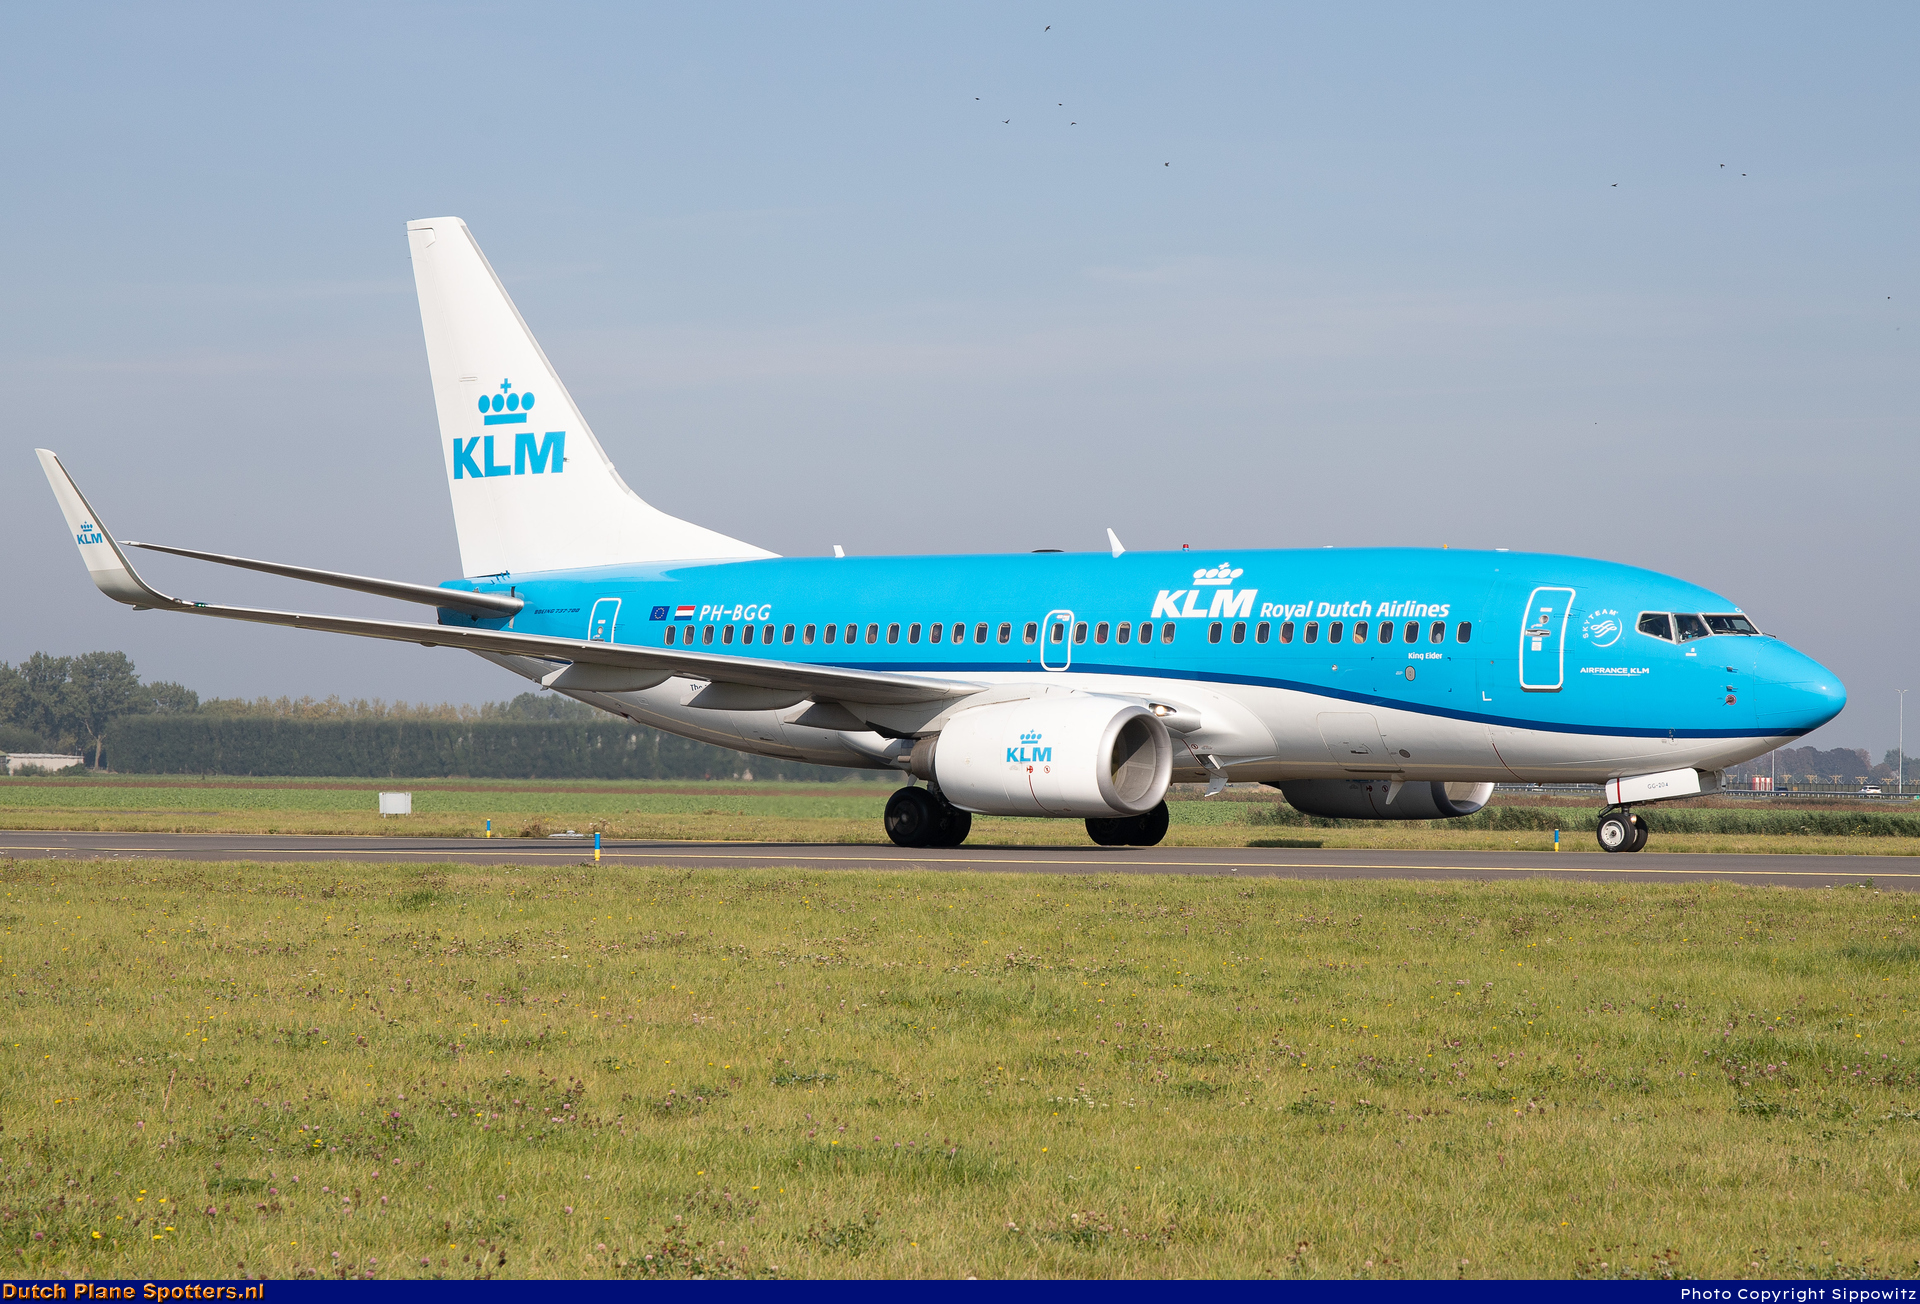 PH-BGG Boeing 737-700 KLM Royal Dutch Airlines by Sippowitz